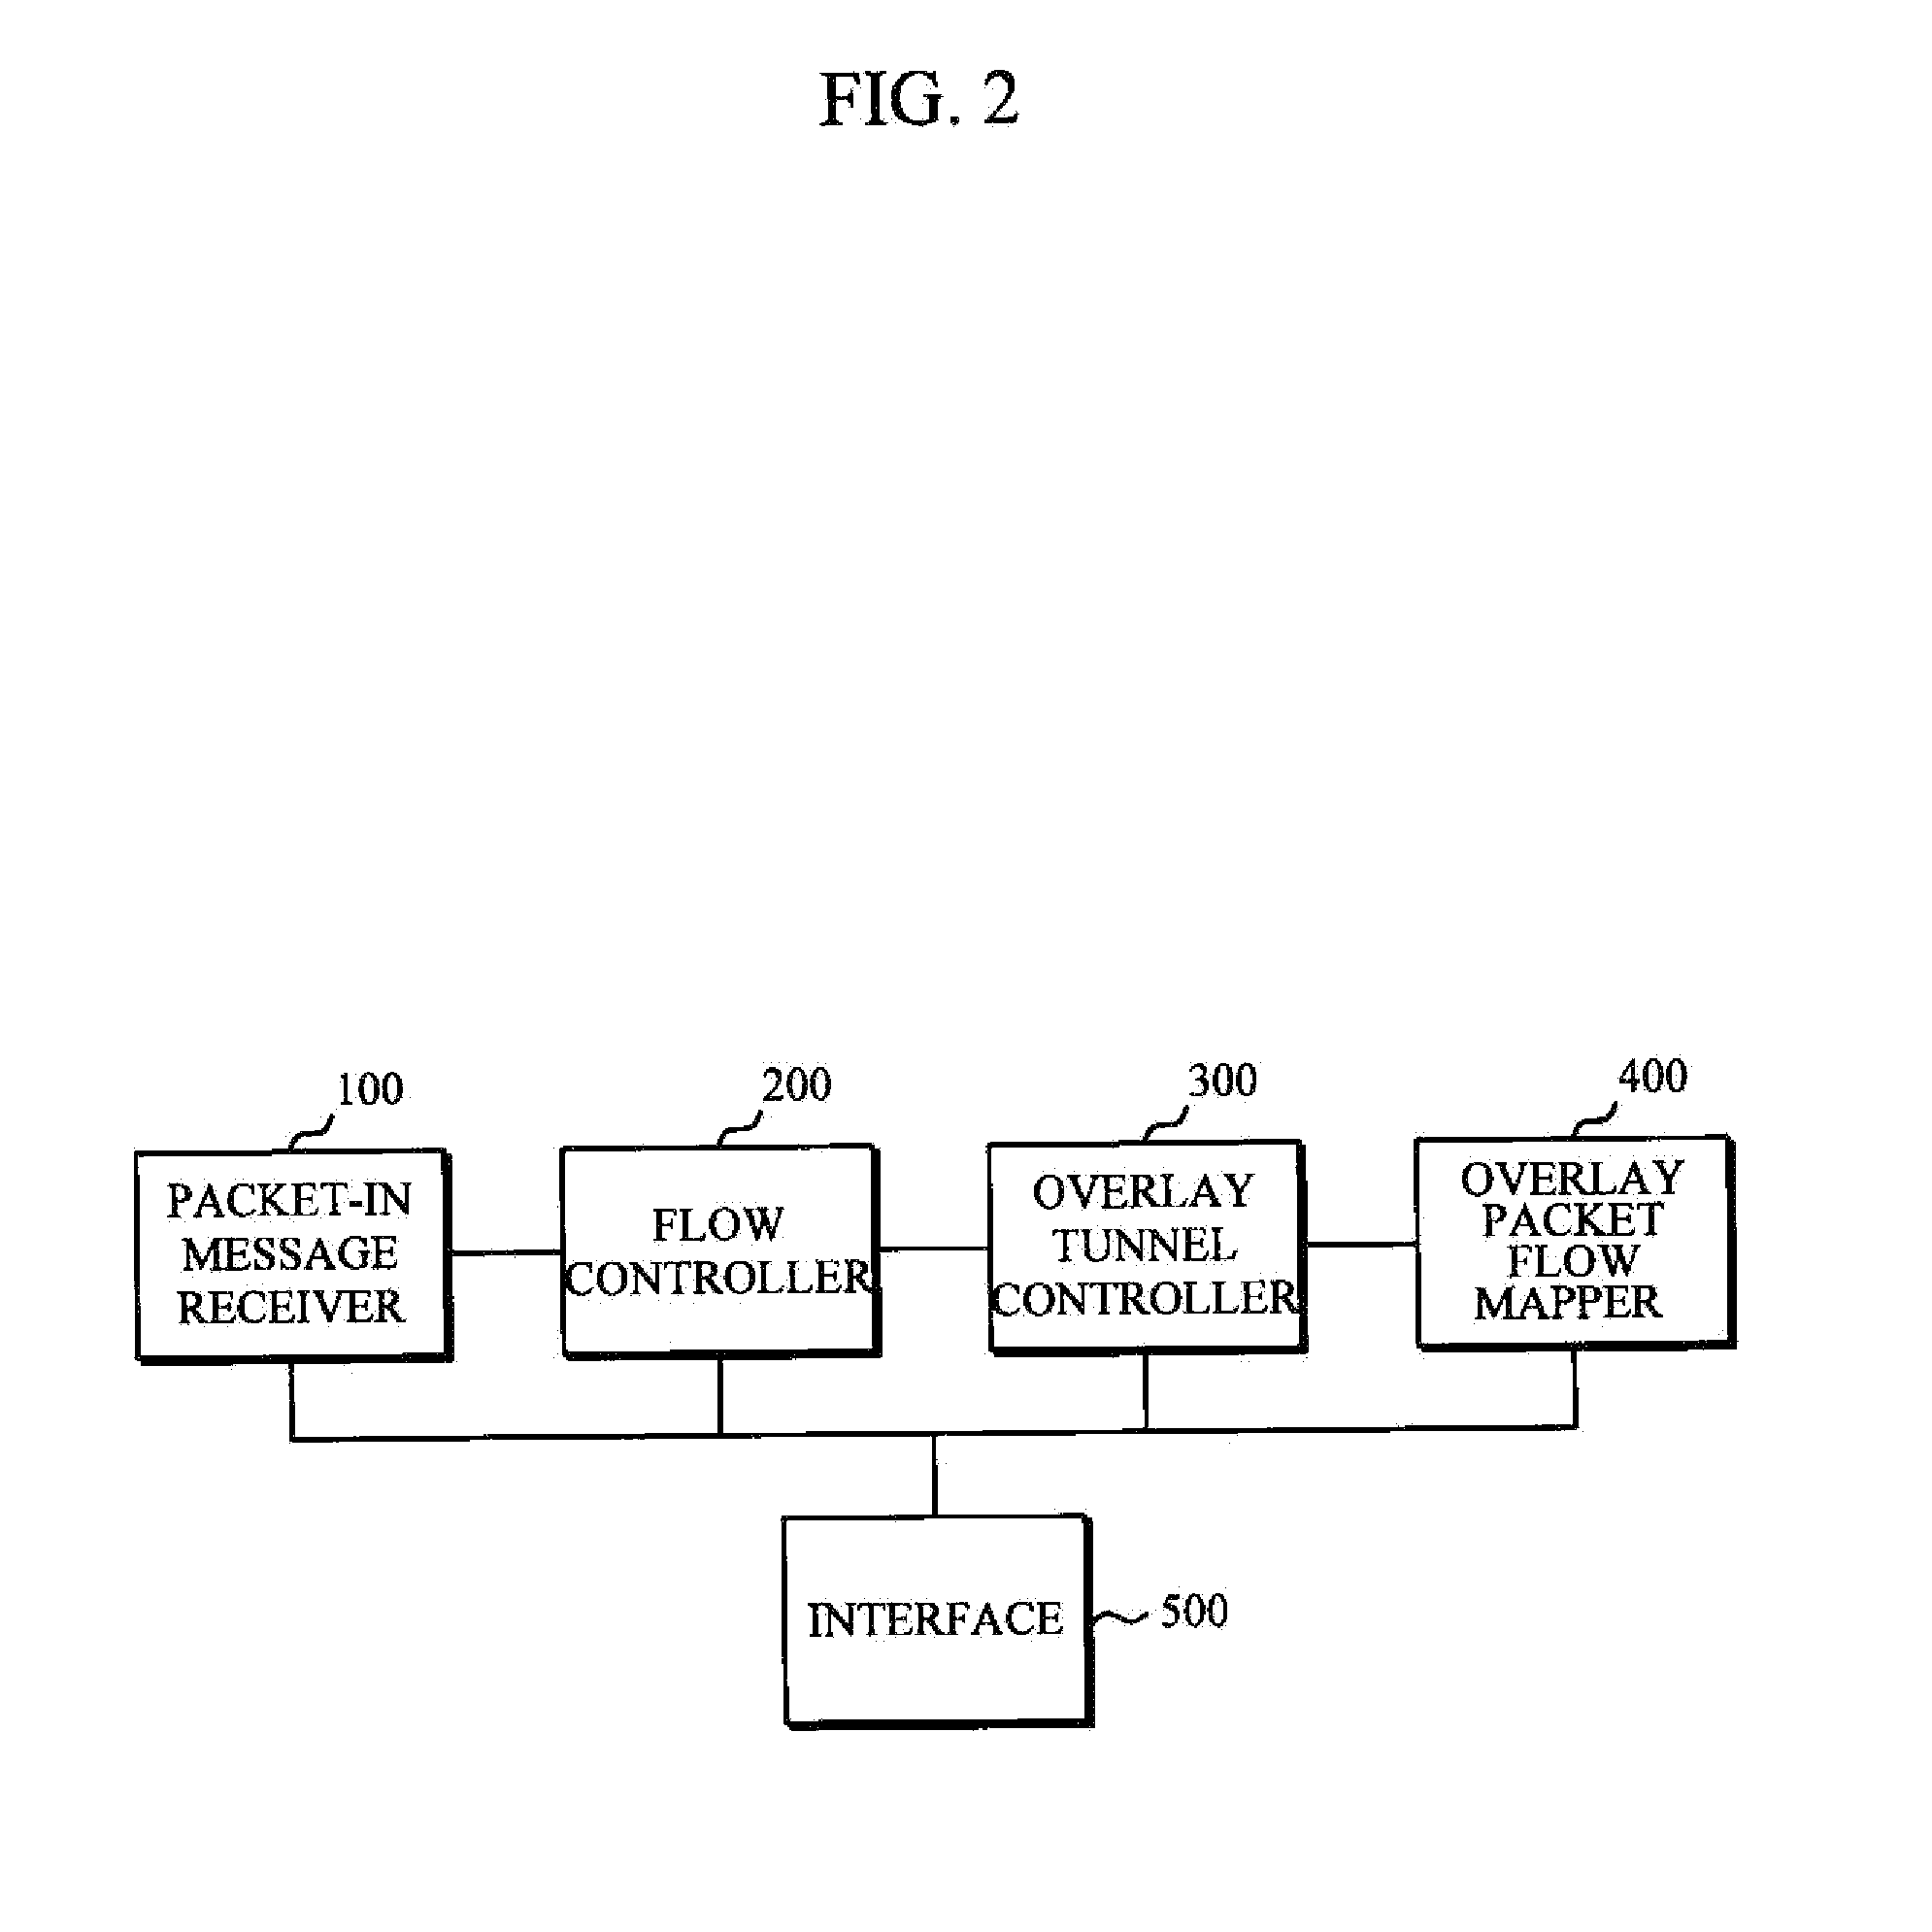 Overlay network-based original packet flow mapping apparatus and method therefor